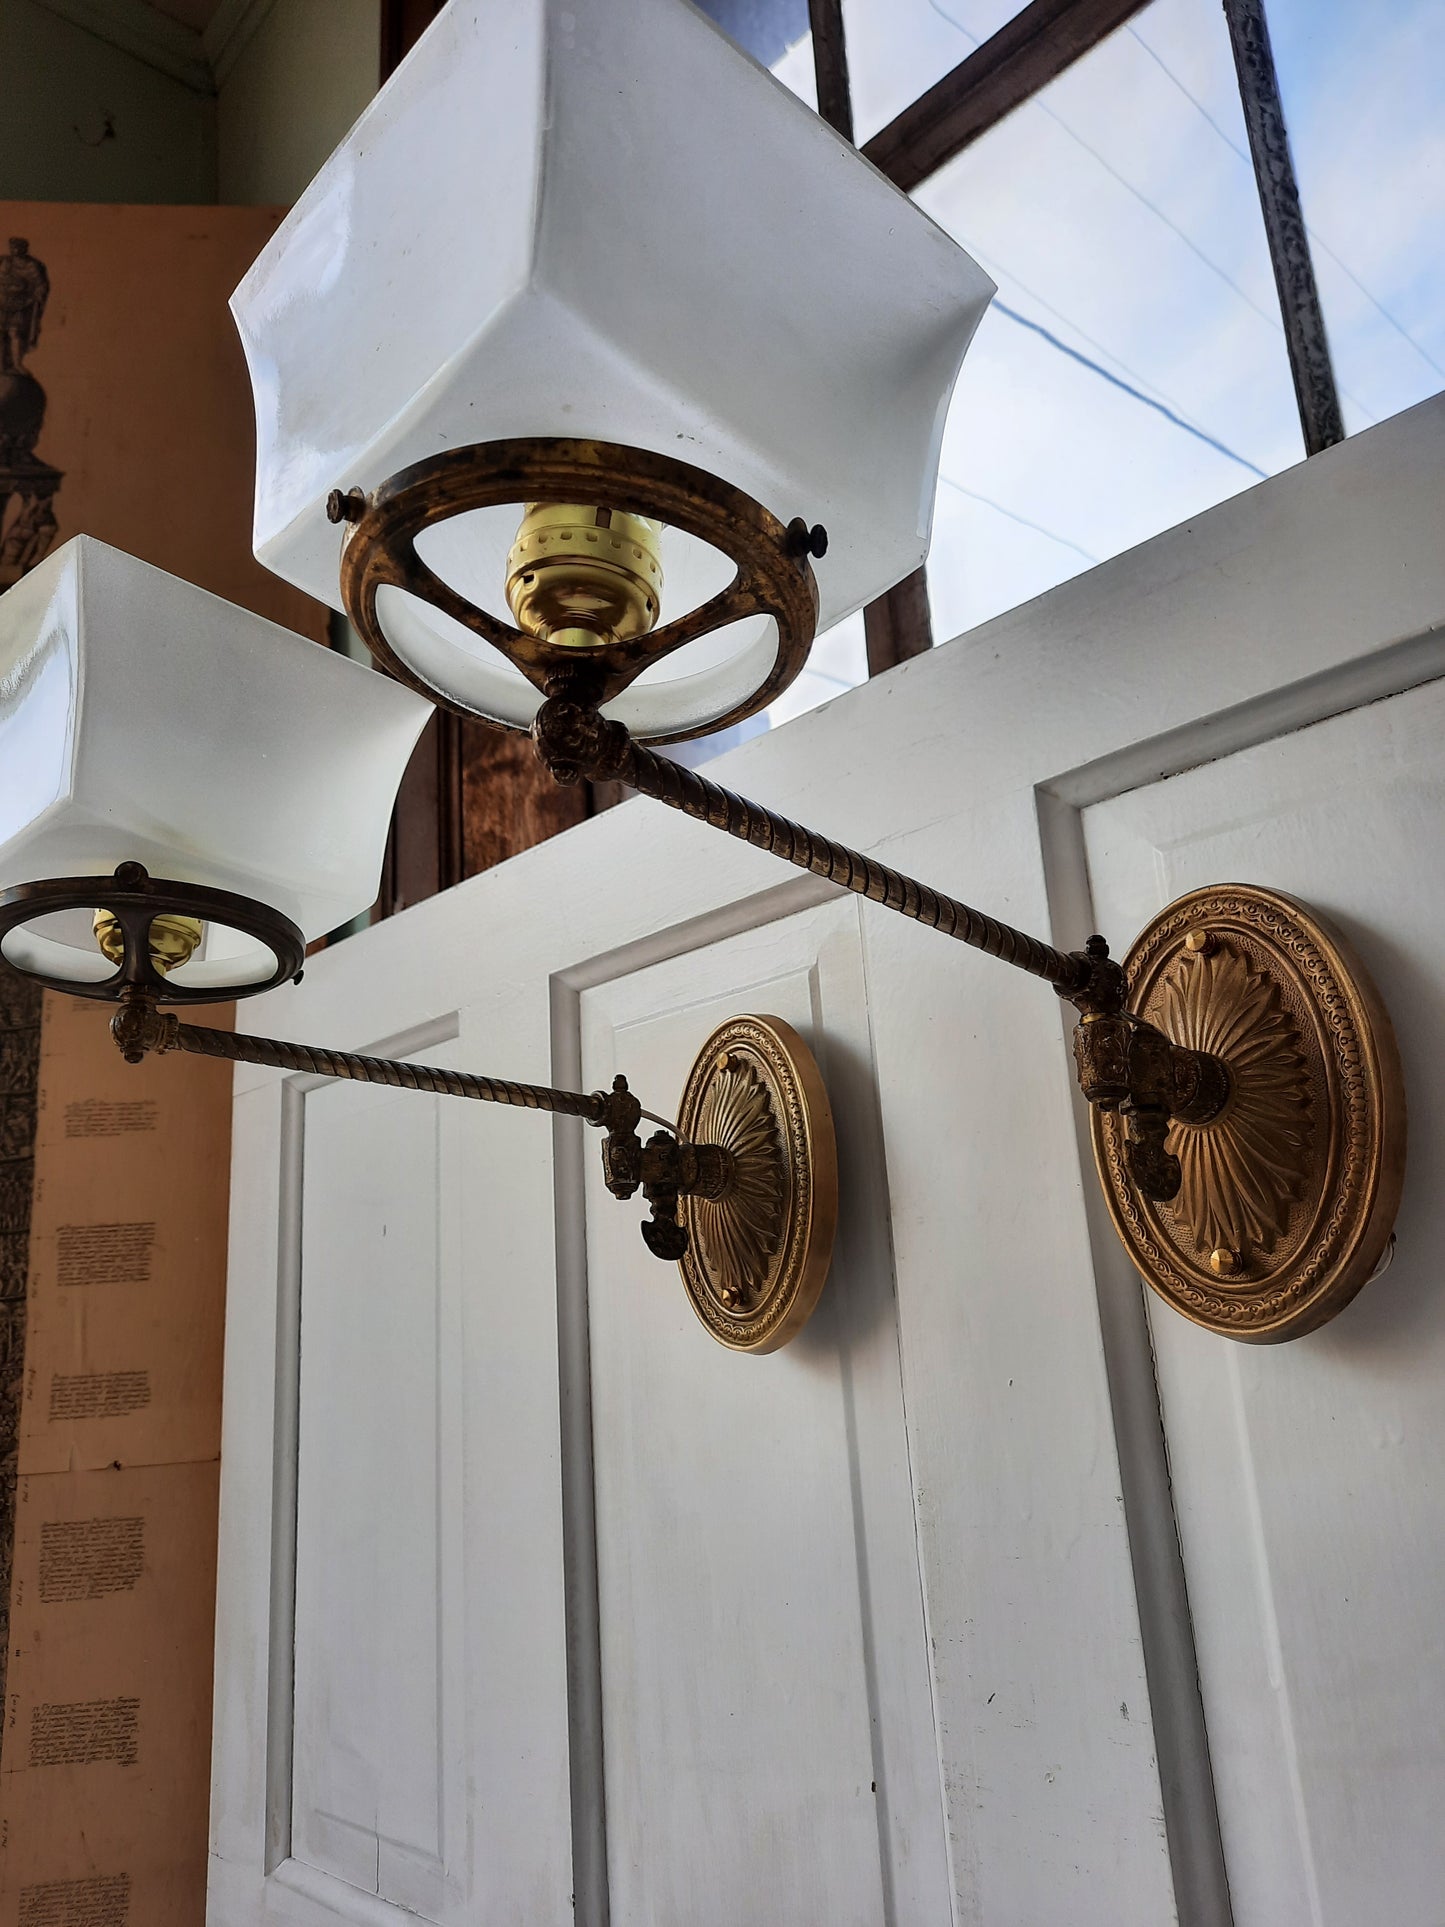 Pair of Converted Antique Gas Sconce with Swinging Arms, Ornate Victorian Gas Wall Sconce with Square Shade 020104